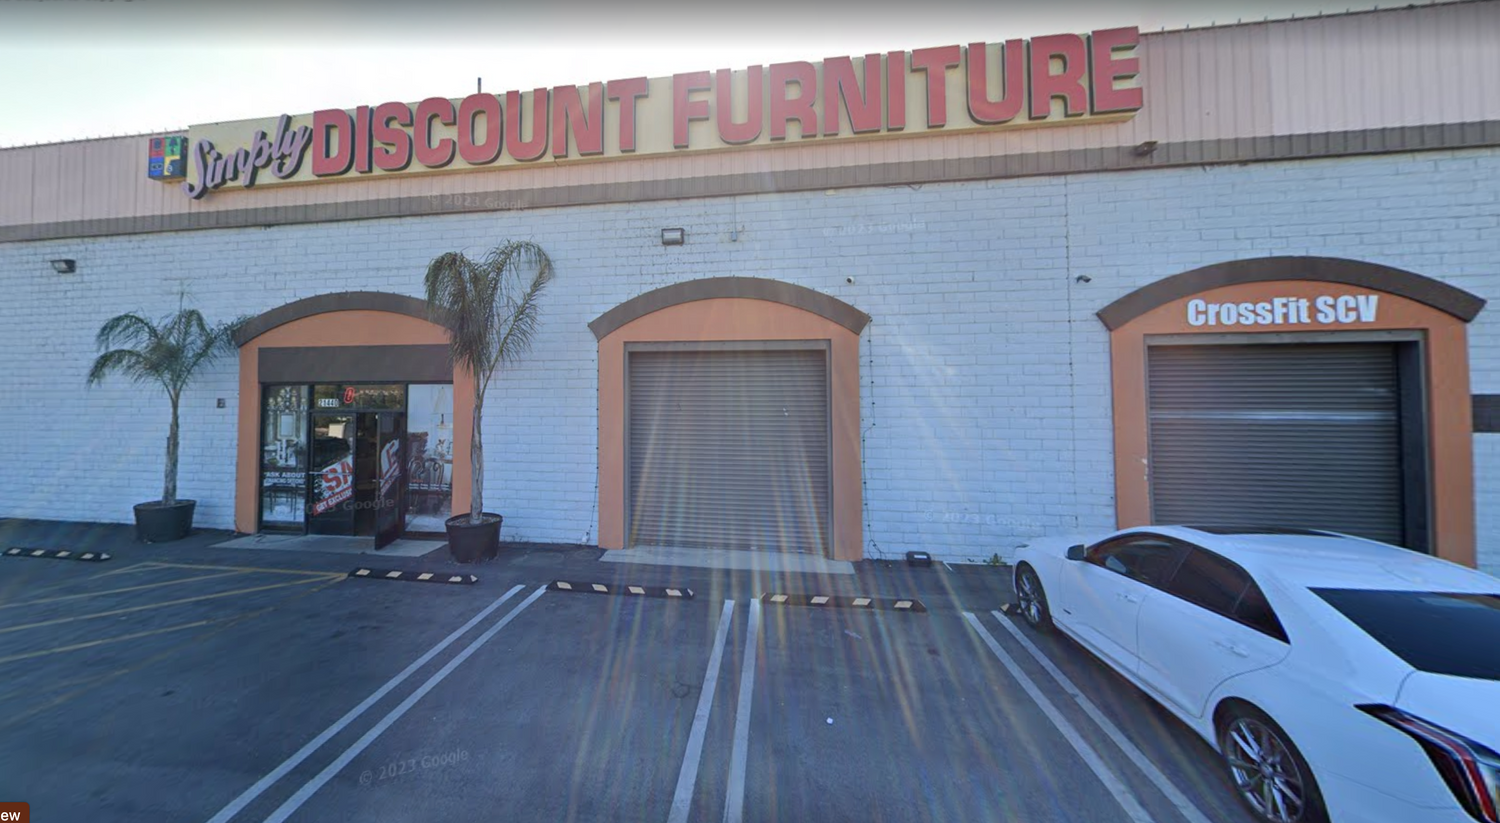 Simply Discount Furniture Inc was established in 1989 by Don.